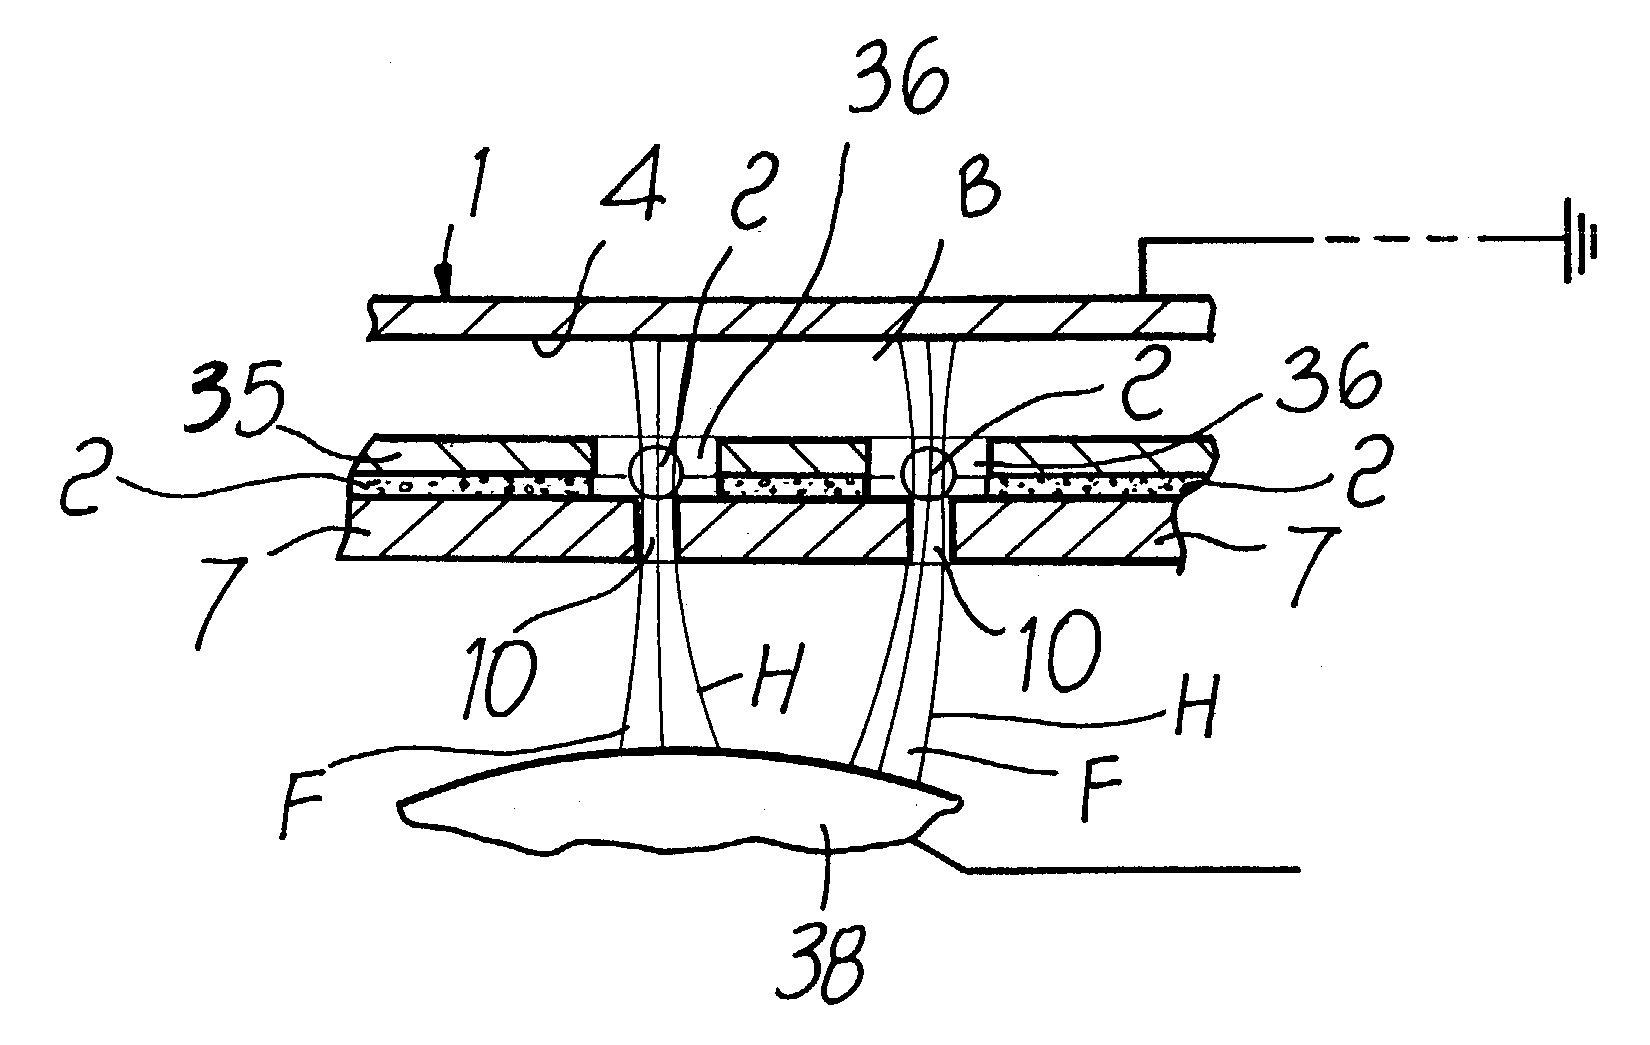 Method for finishing a manufactured article by powder painting